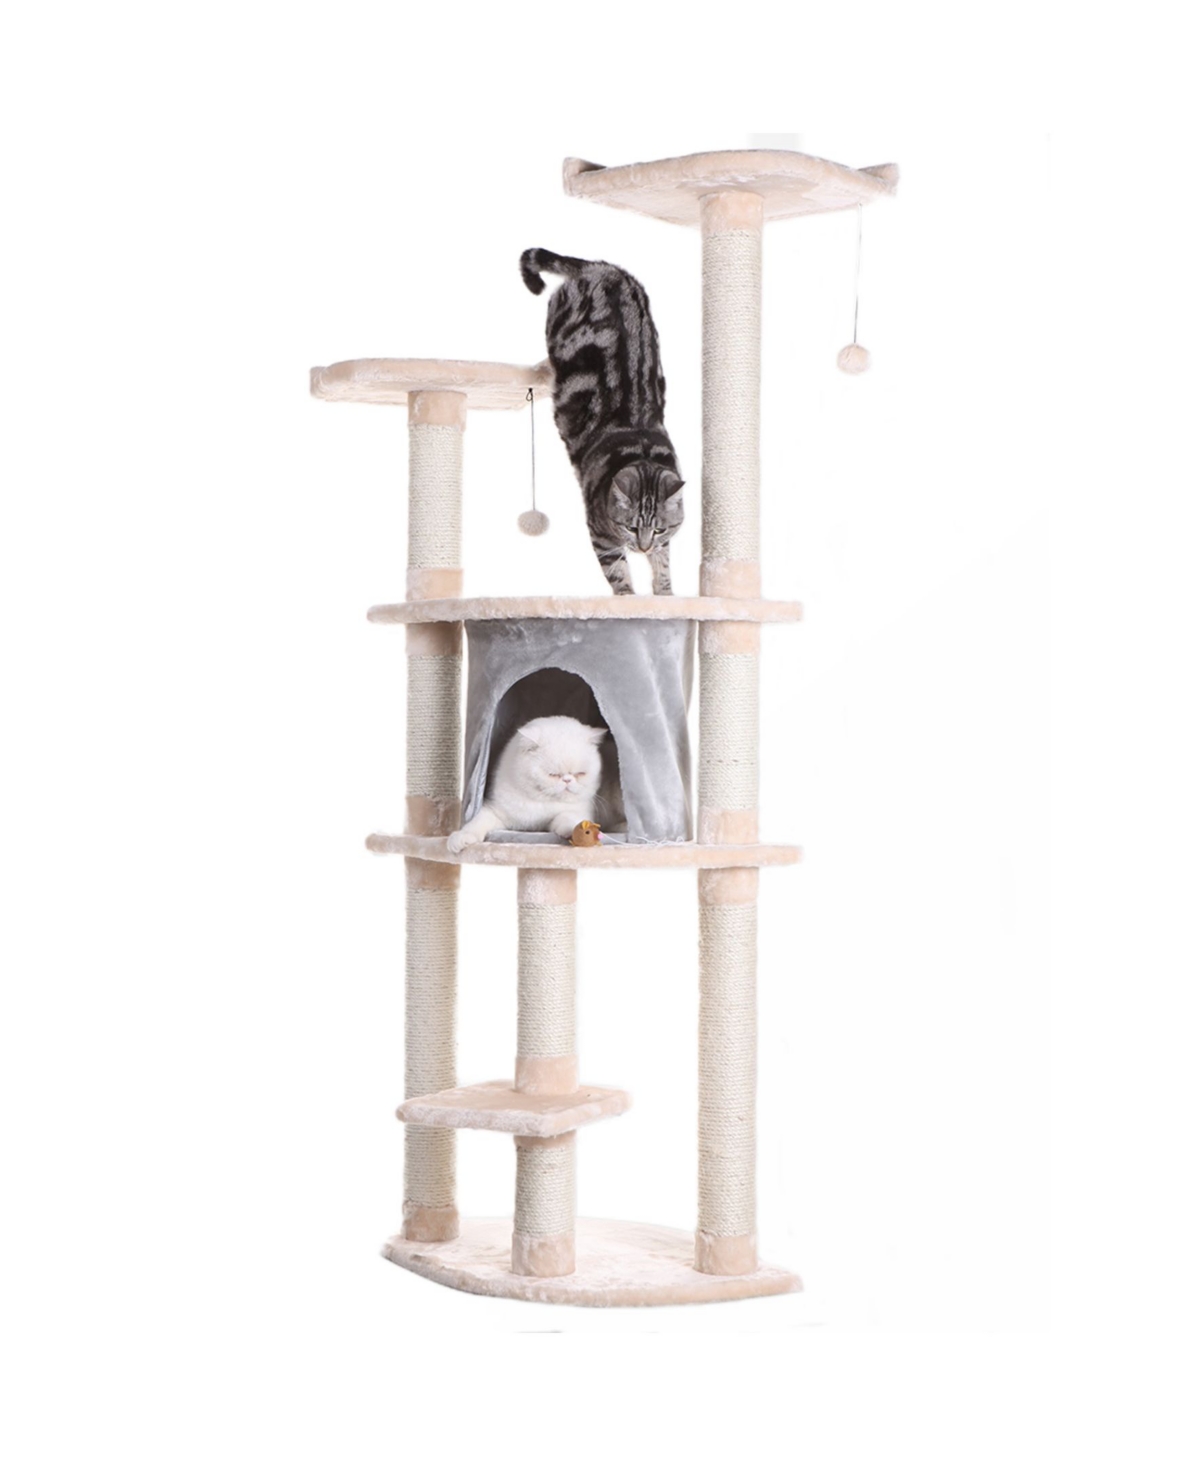 64" Real Wood Cat Tree With Scratch Post, Soft-side Playhouse - Almond